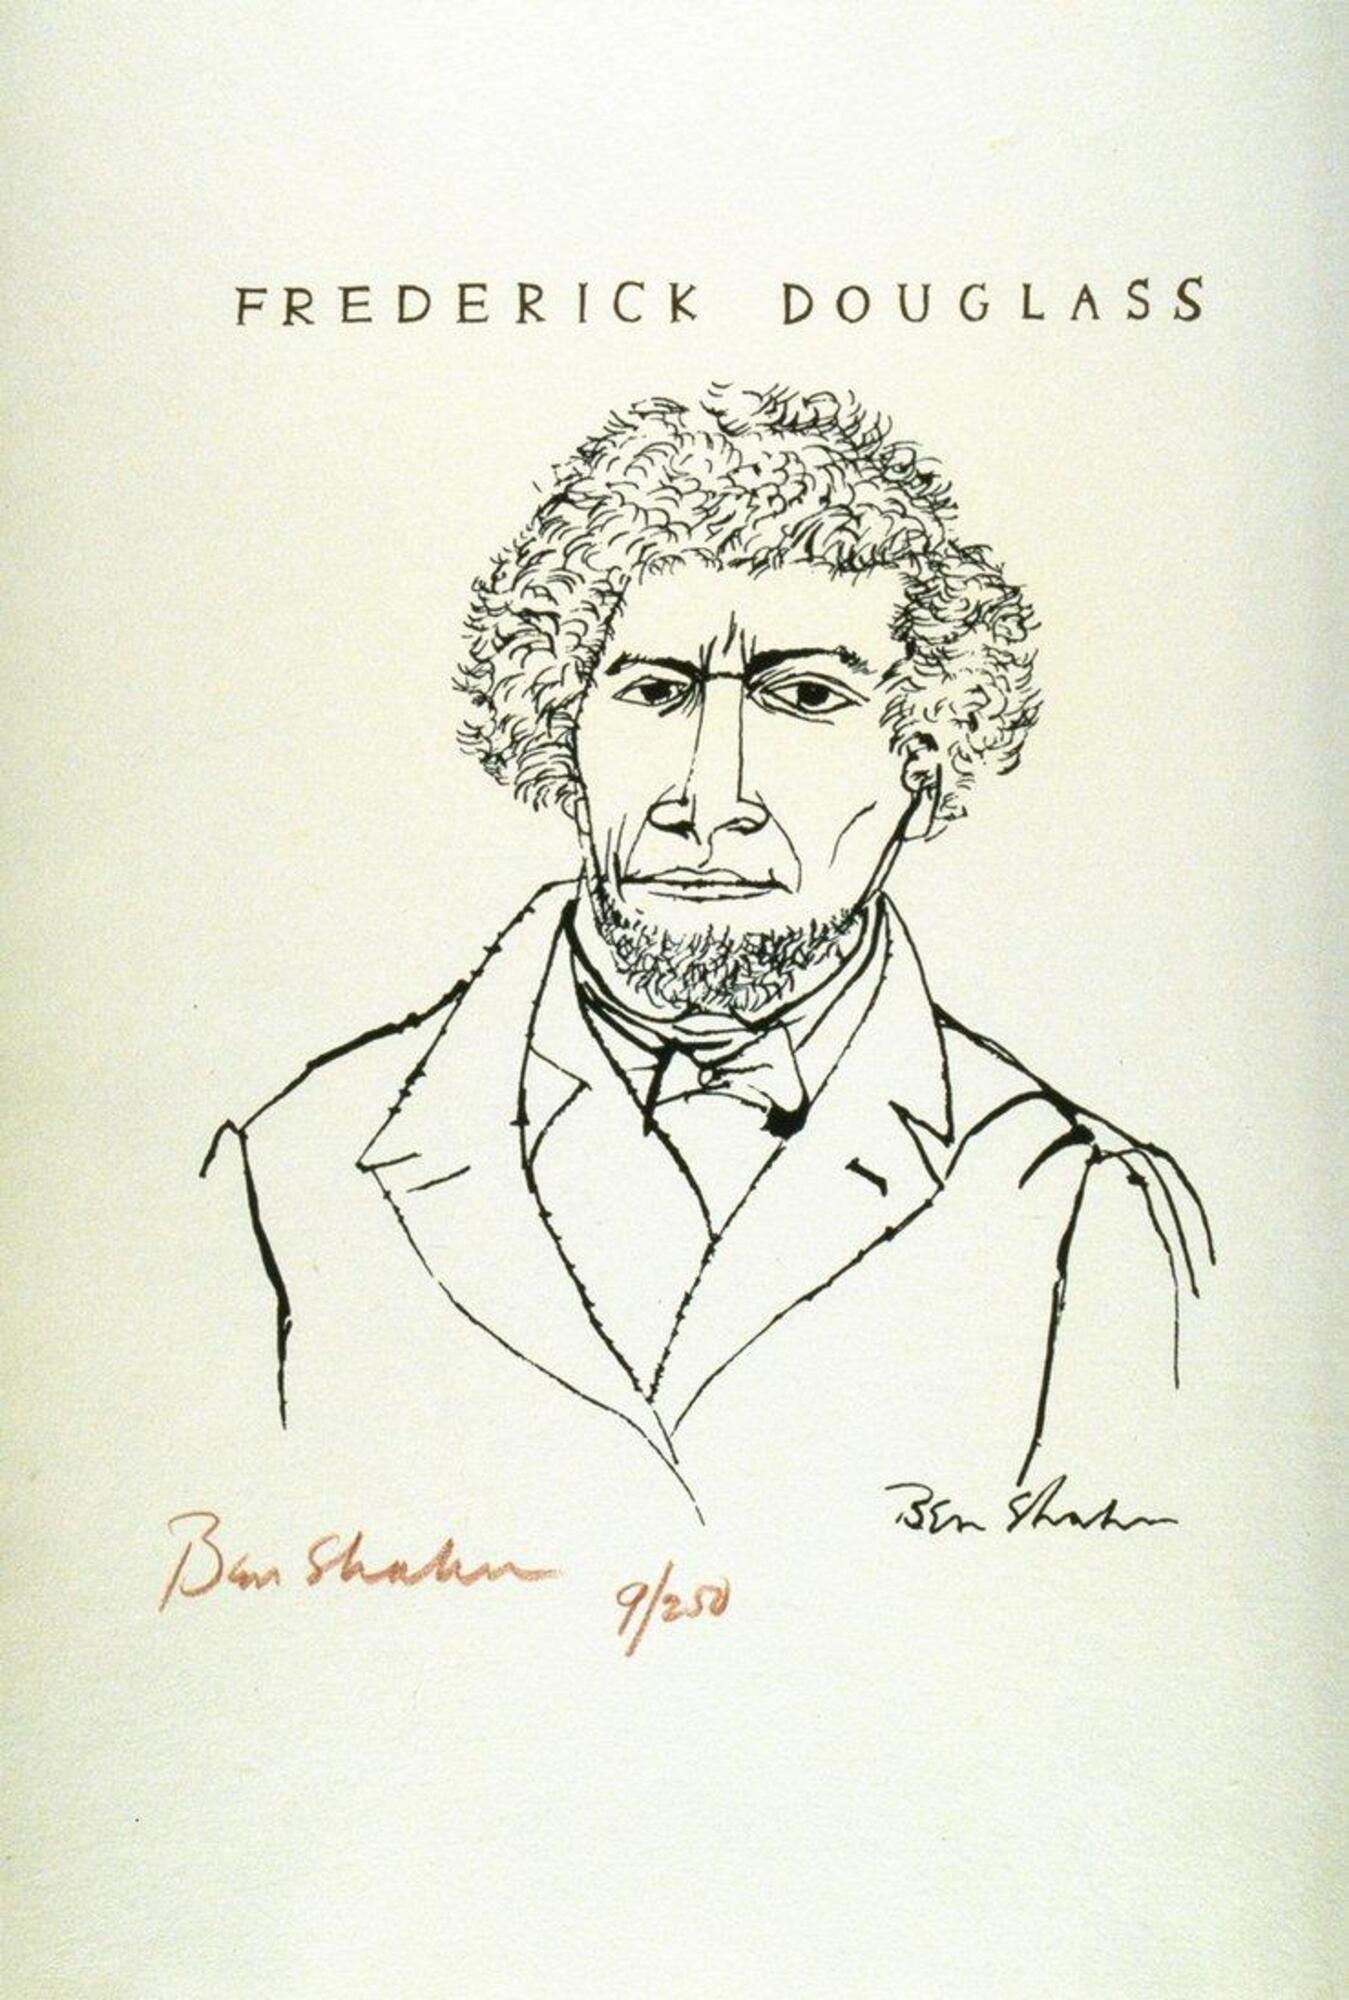 A man is potrayed with curly hair and beard, a stern facial expression, and a formal suit and bowtie. His gaze is slightly off-center. The words &quot;Frederick Douglass&quot; borders the piece along with the artist&#39;s signatures and the screenprint number.